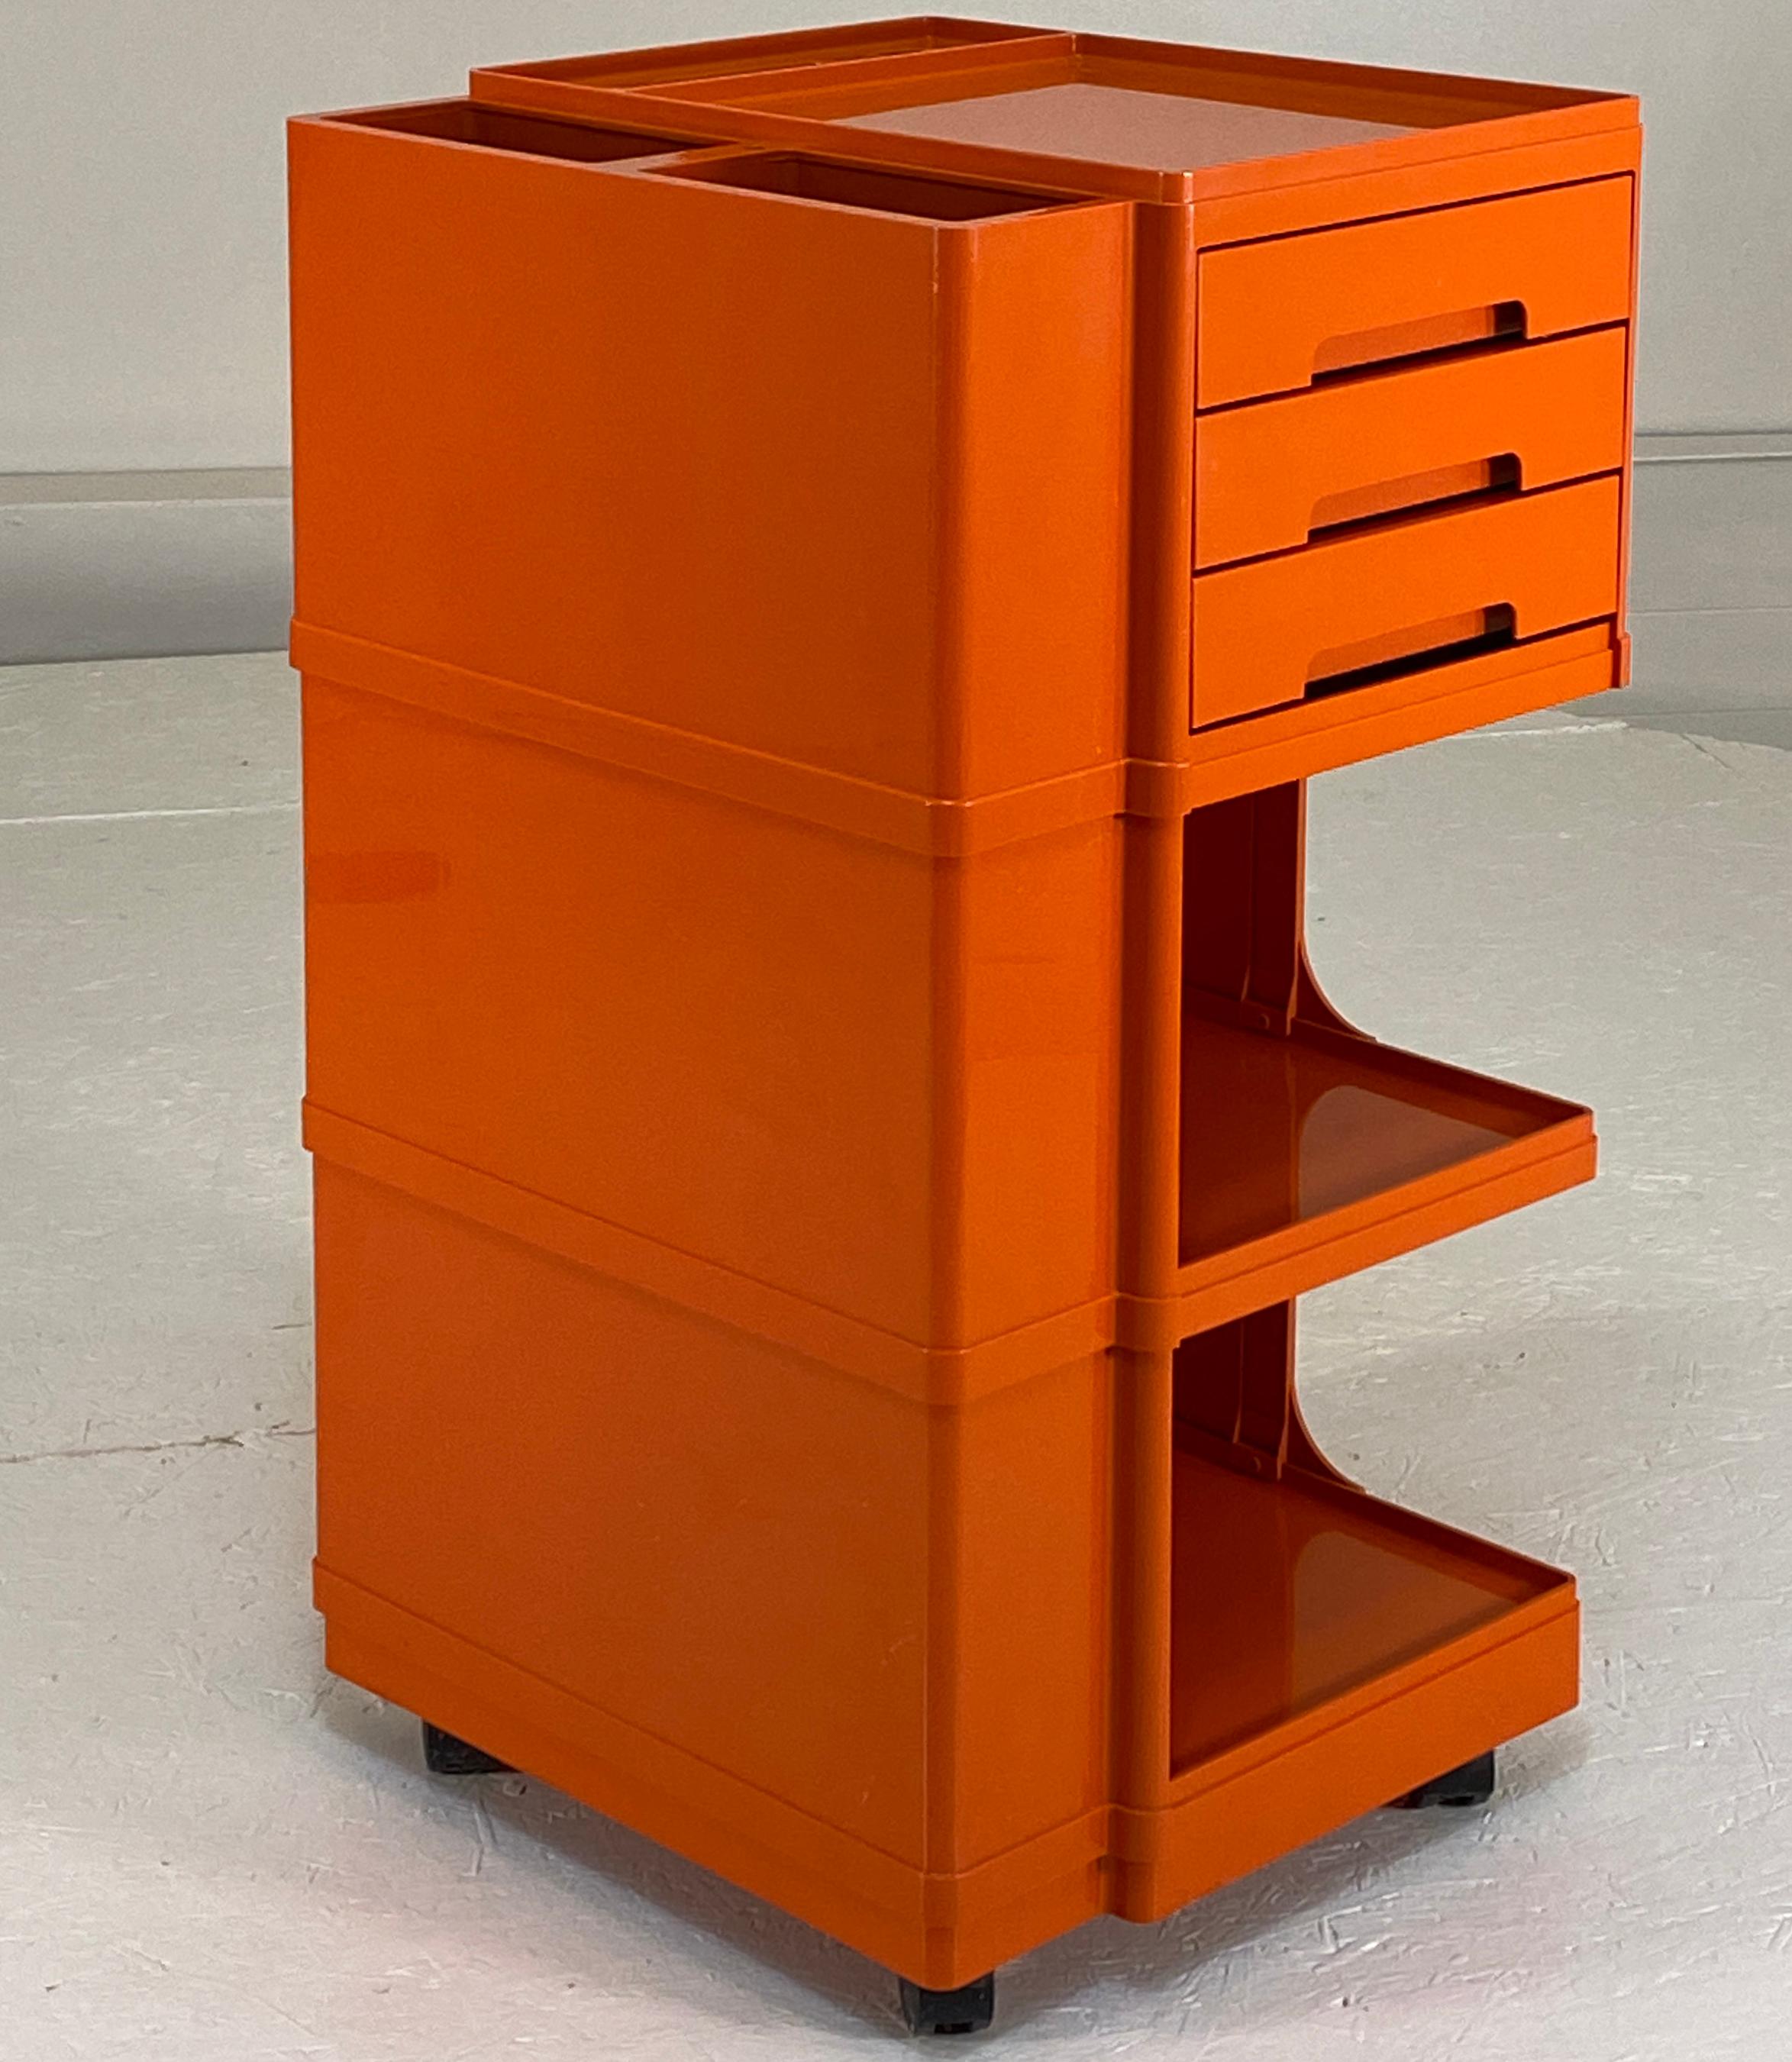 Italian Art Cart designed by Giovanni Pelis for Stile Neolt, 1970s. In excellent condition. 17 x 16 x 30 5/8